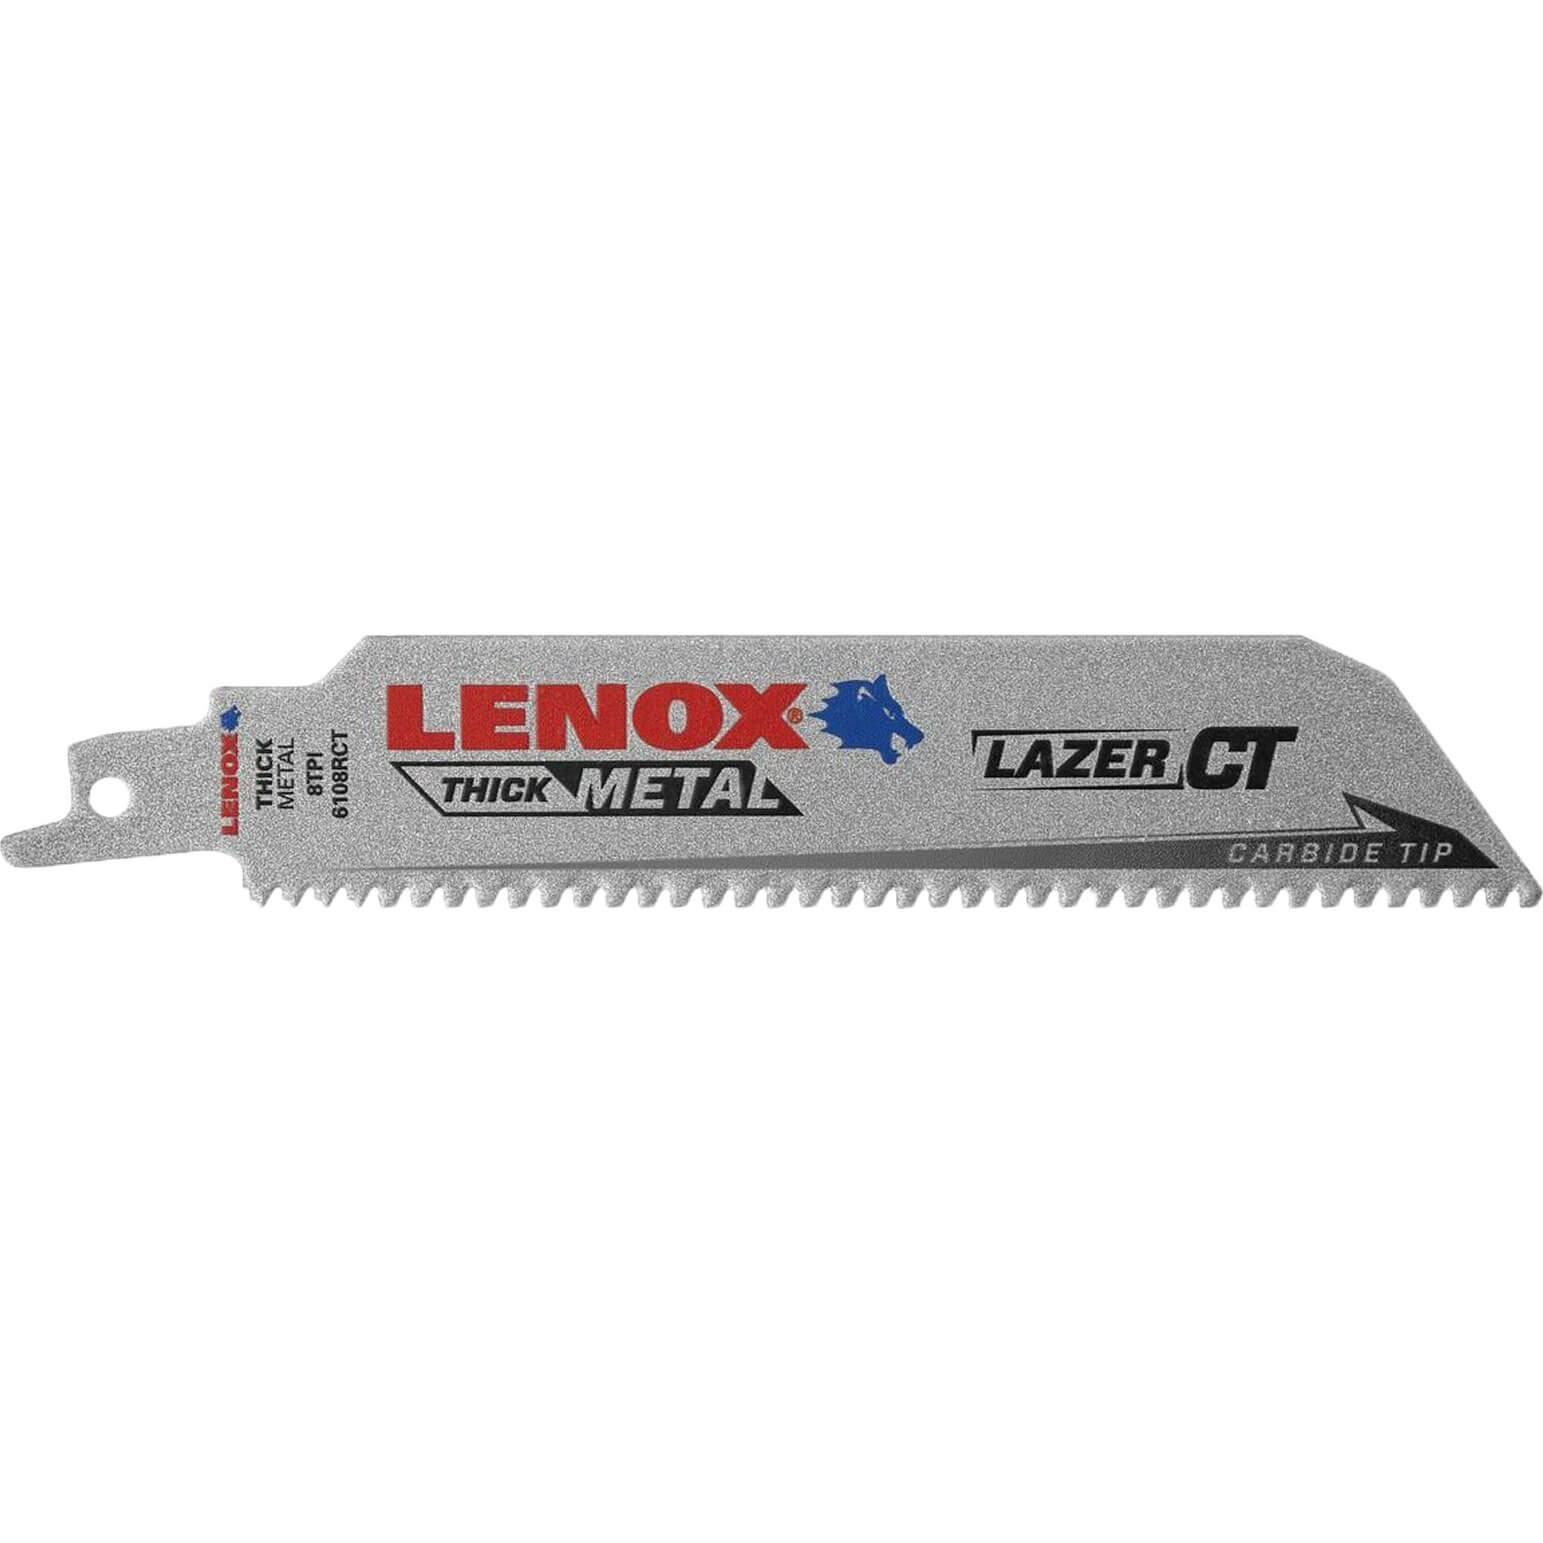 Image of Lenox Lazer CT Carbide Tipped Reciprocating Sabre Saw Blades 230mm Pack of 1